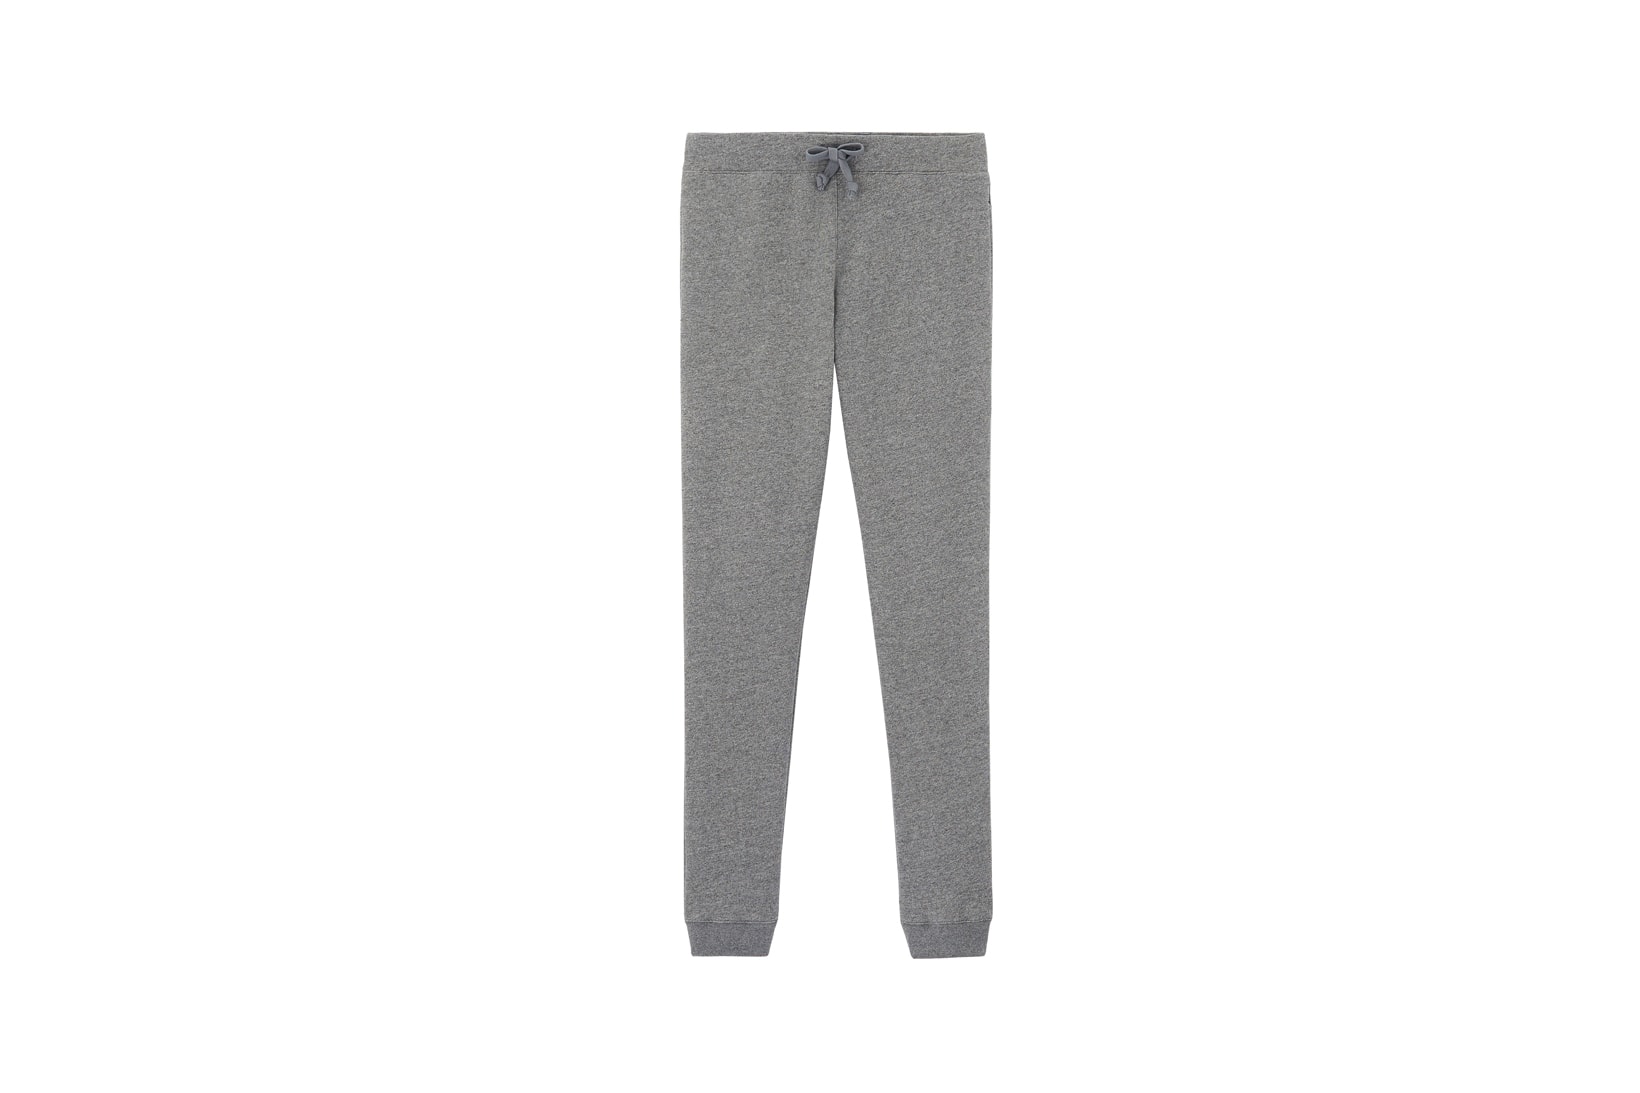 A.P.C. Fall/Winter 2018 Collection Sweatpants Grey